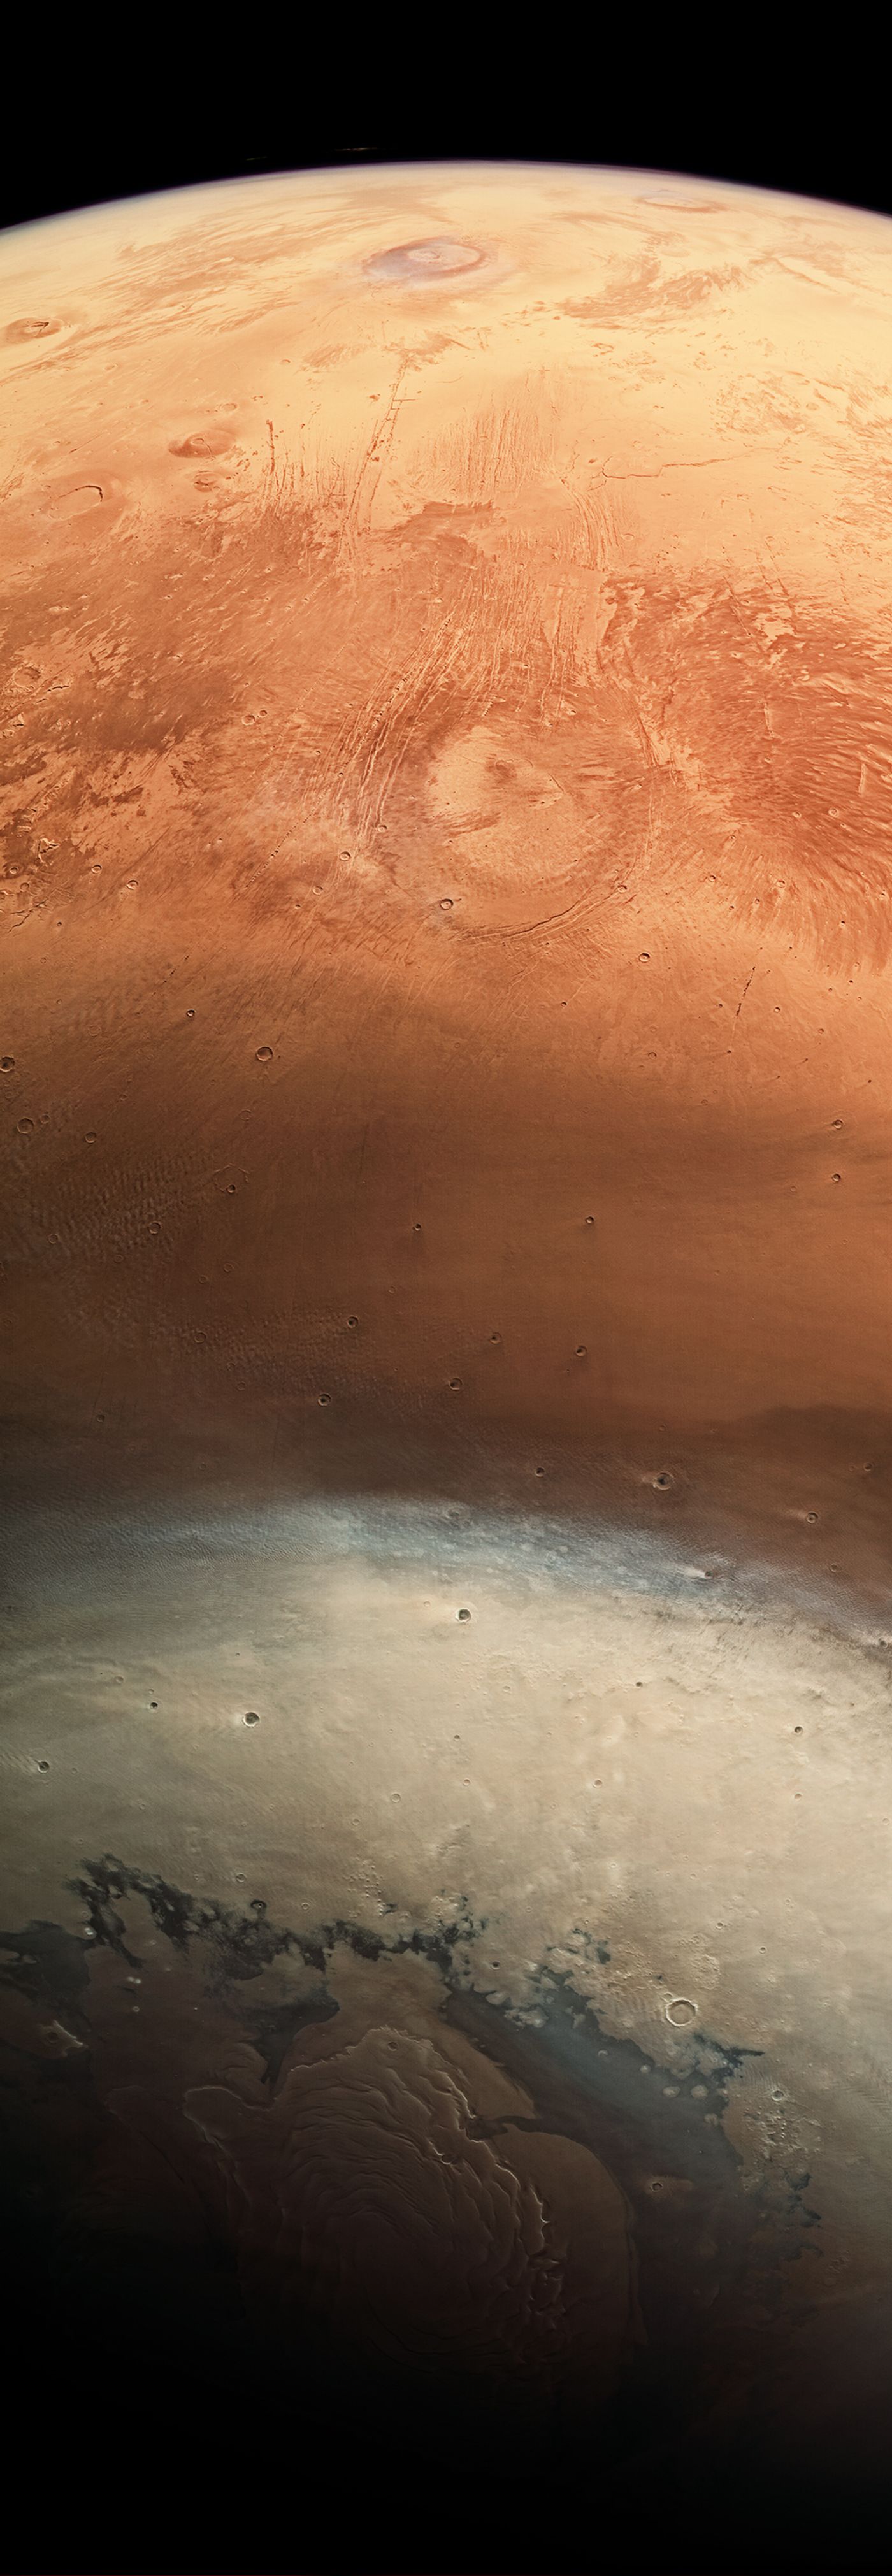 A detailed wide-angle image of Mars snapped by the ESA's Mars Express spacecraft.